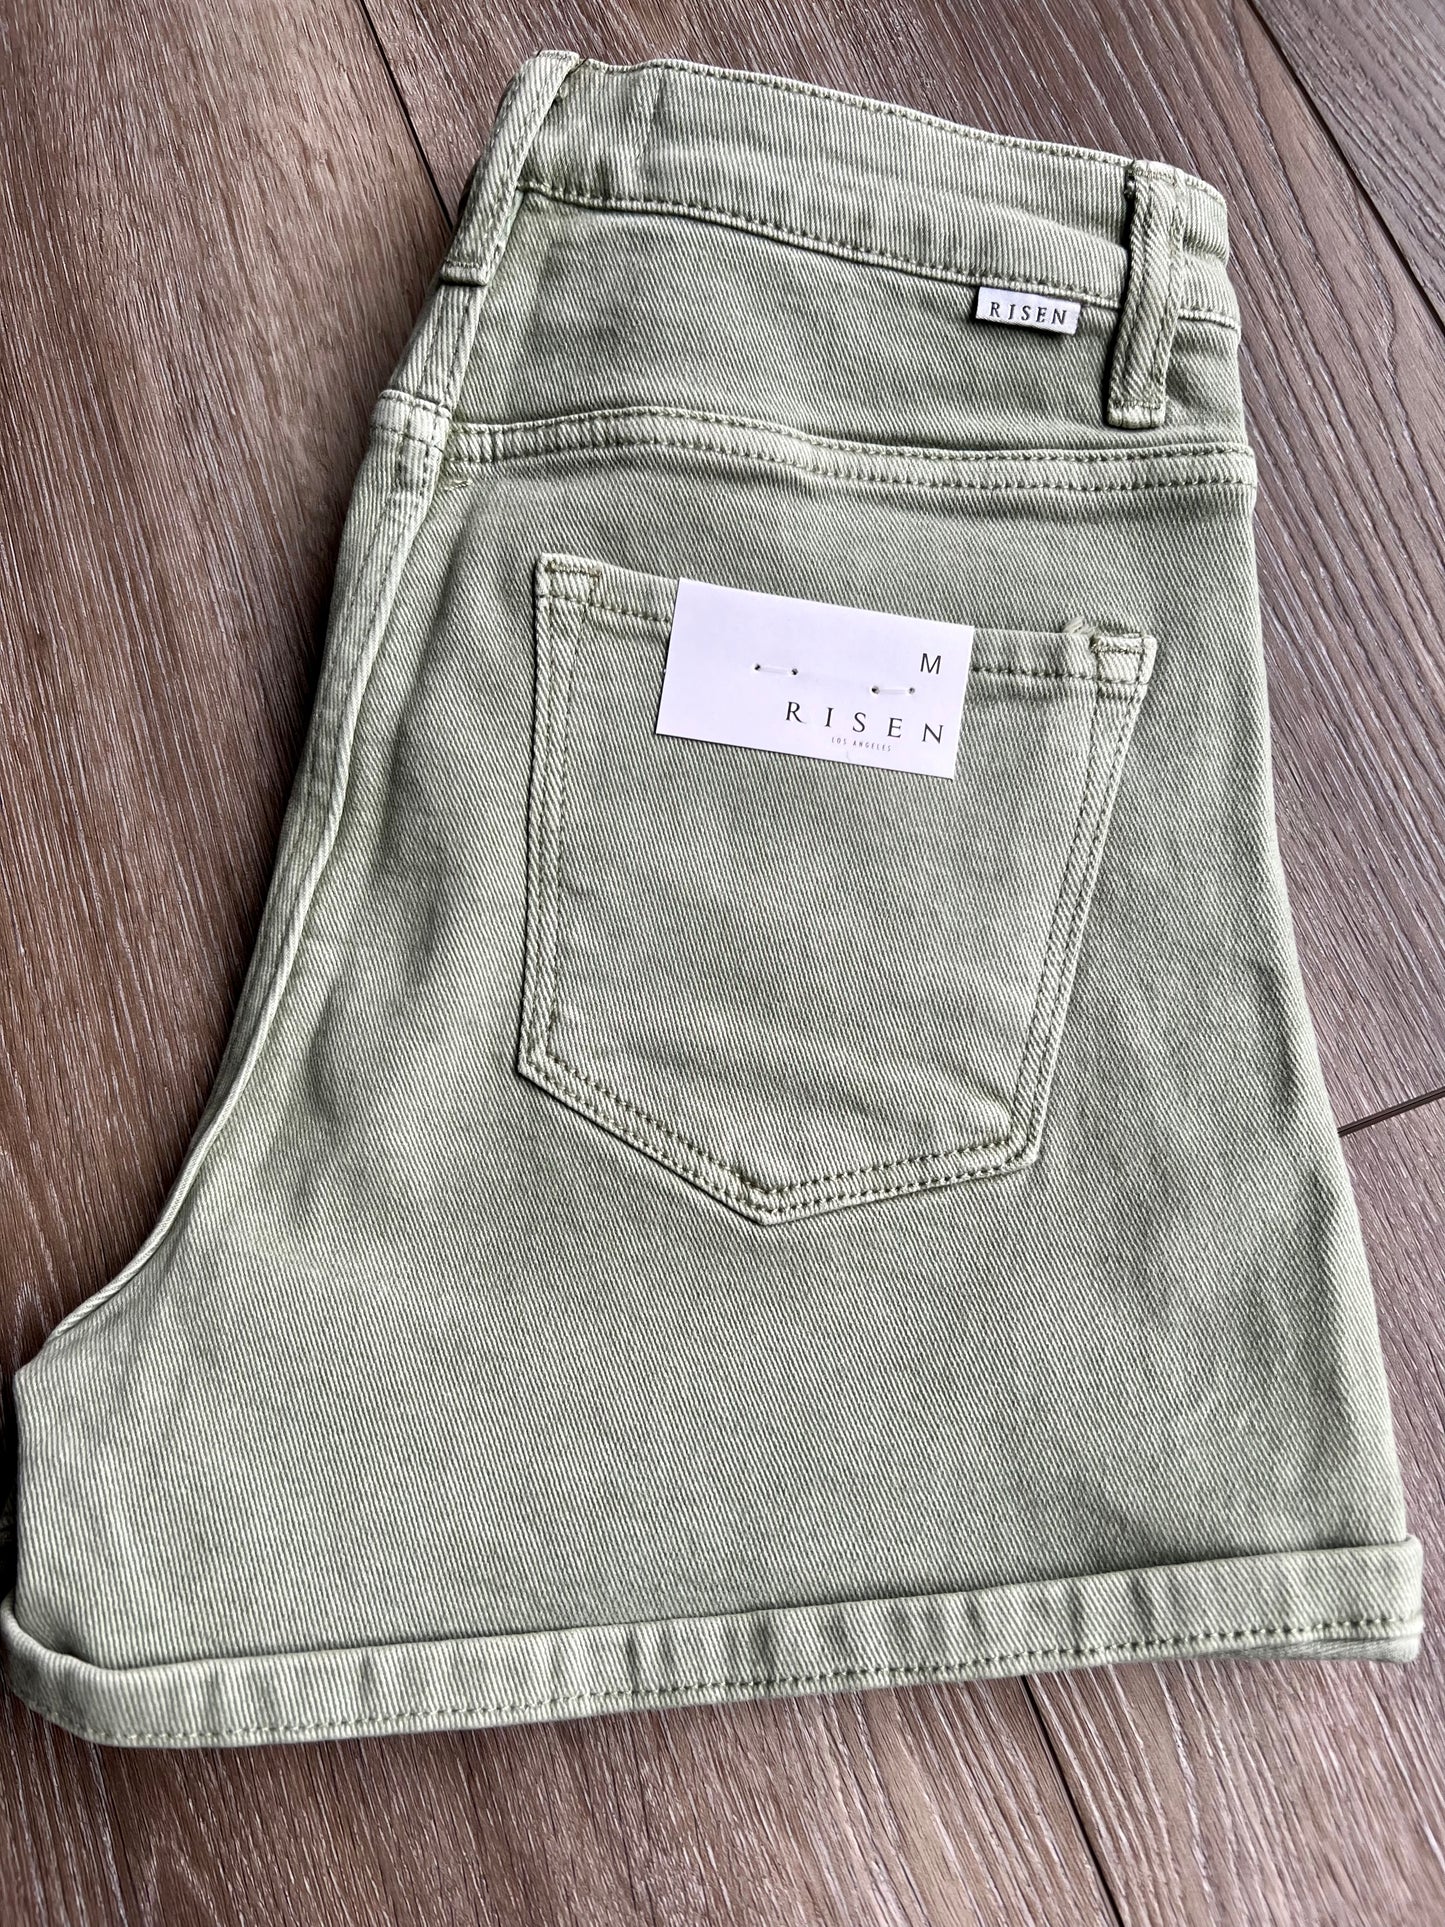 Risen High-Rise Non-Distressed Olive Jean Shorts